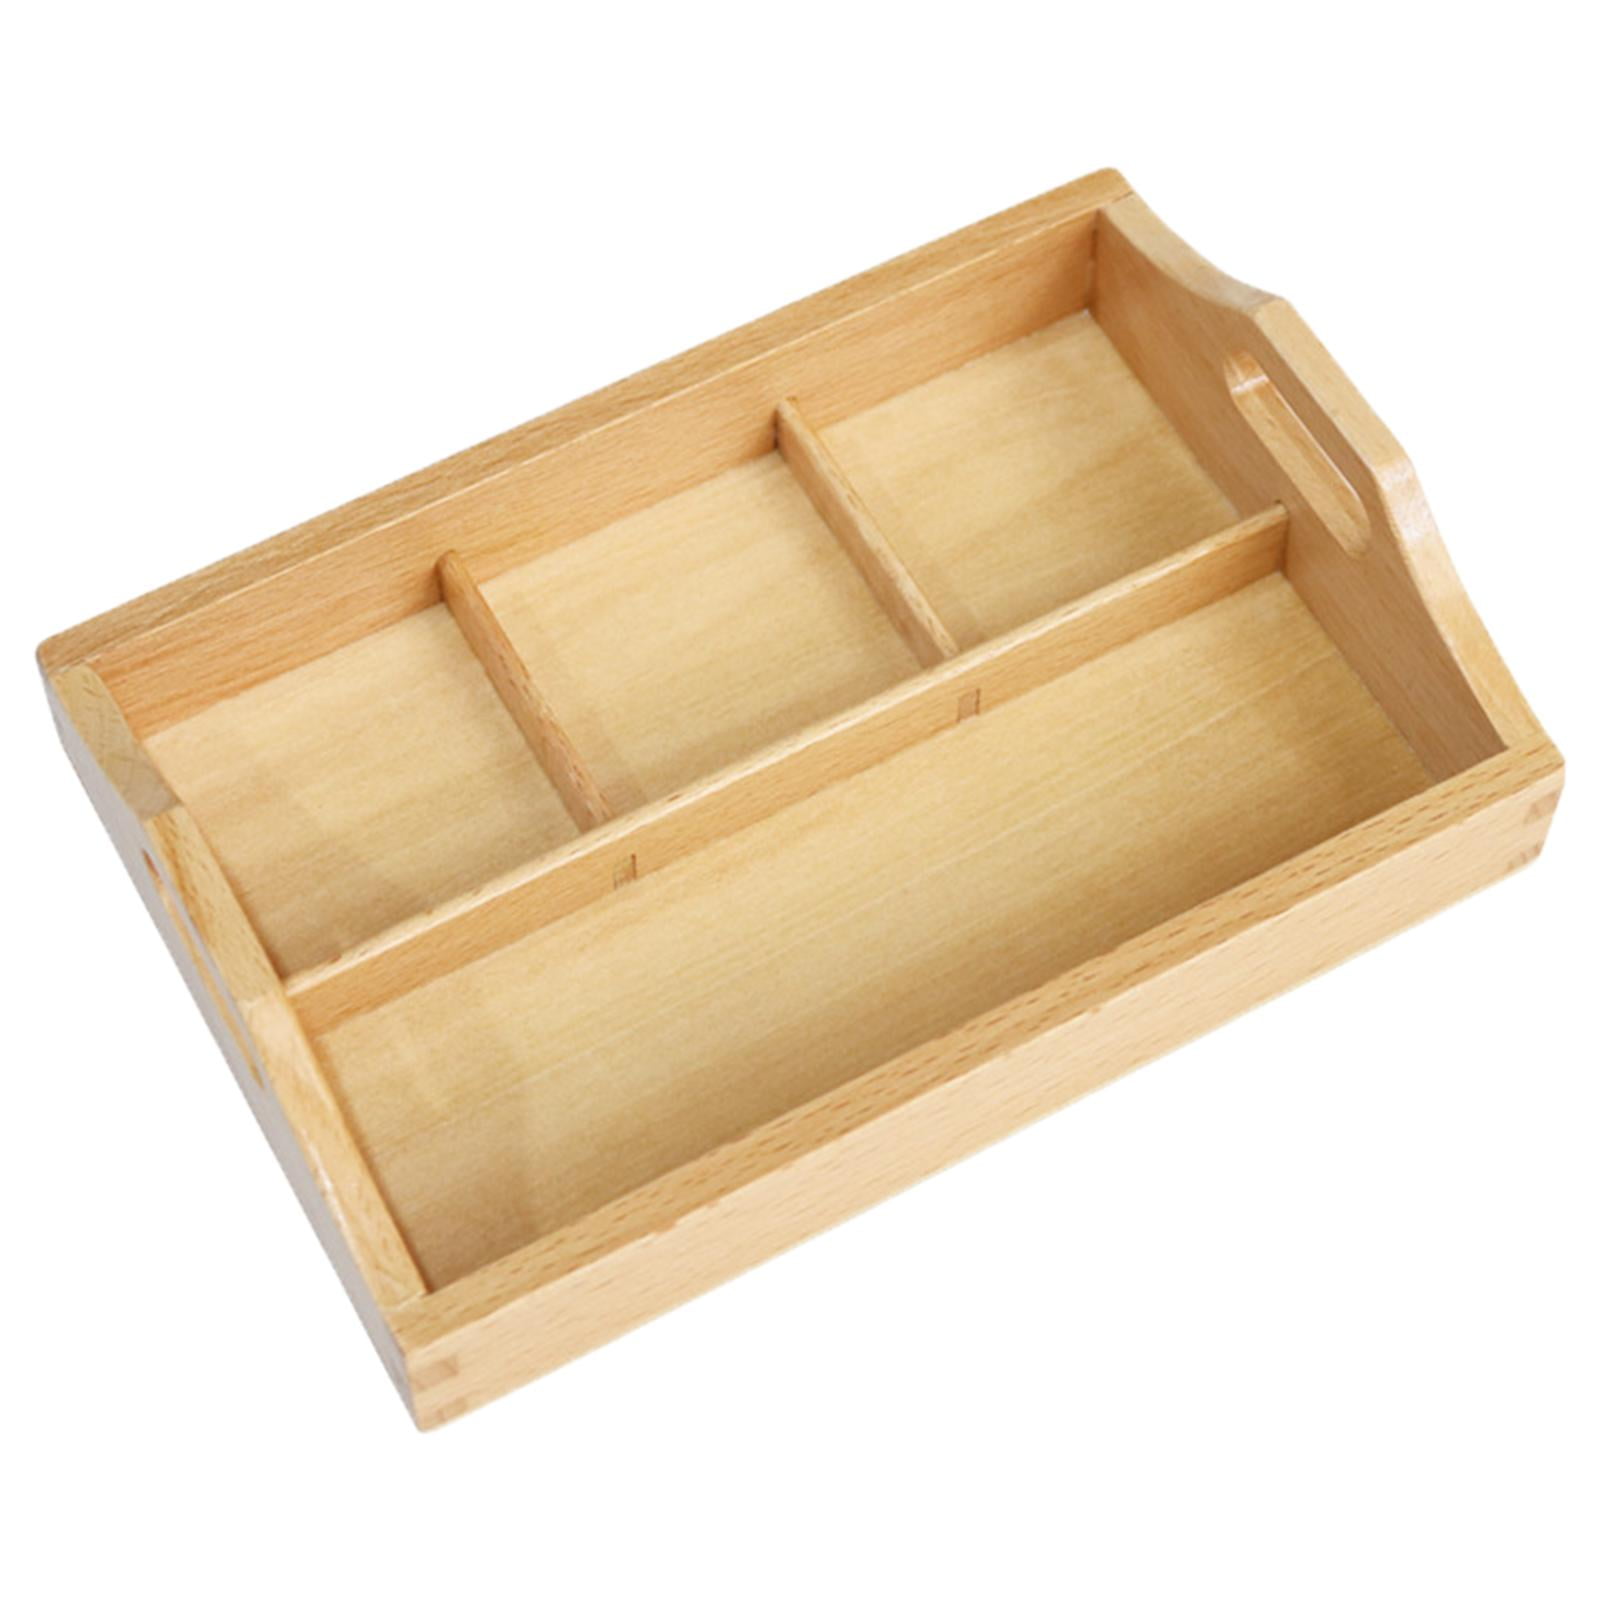  TOVINANNA Teaching Aid Tray Bathroom Tray Kid Sand Trays  Breakfast Trays Art Trays for Kids Montessori Trays for Toddlers Toy  Sorting Tray Tray Coffee Table Wood Child Storage : Home 